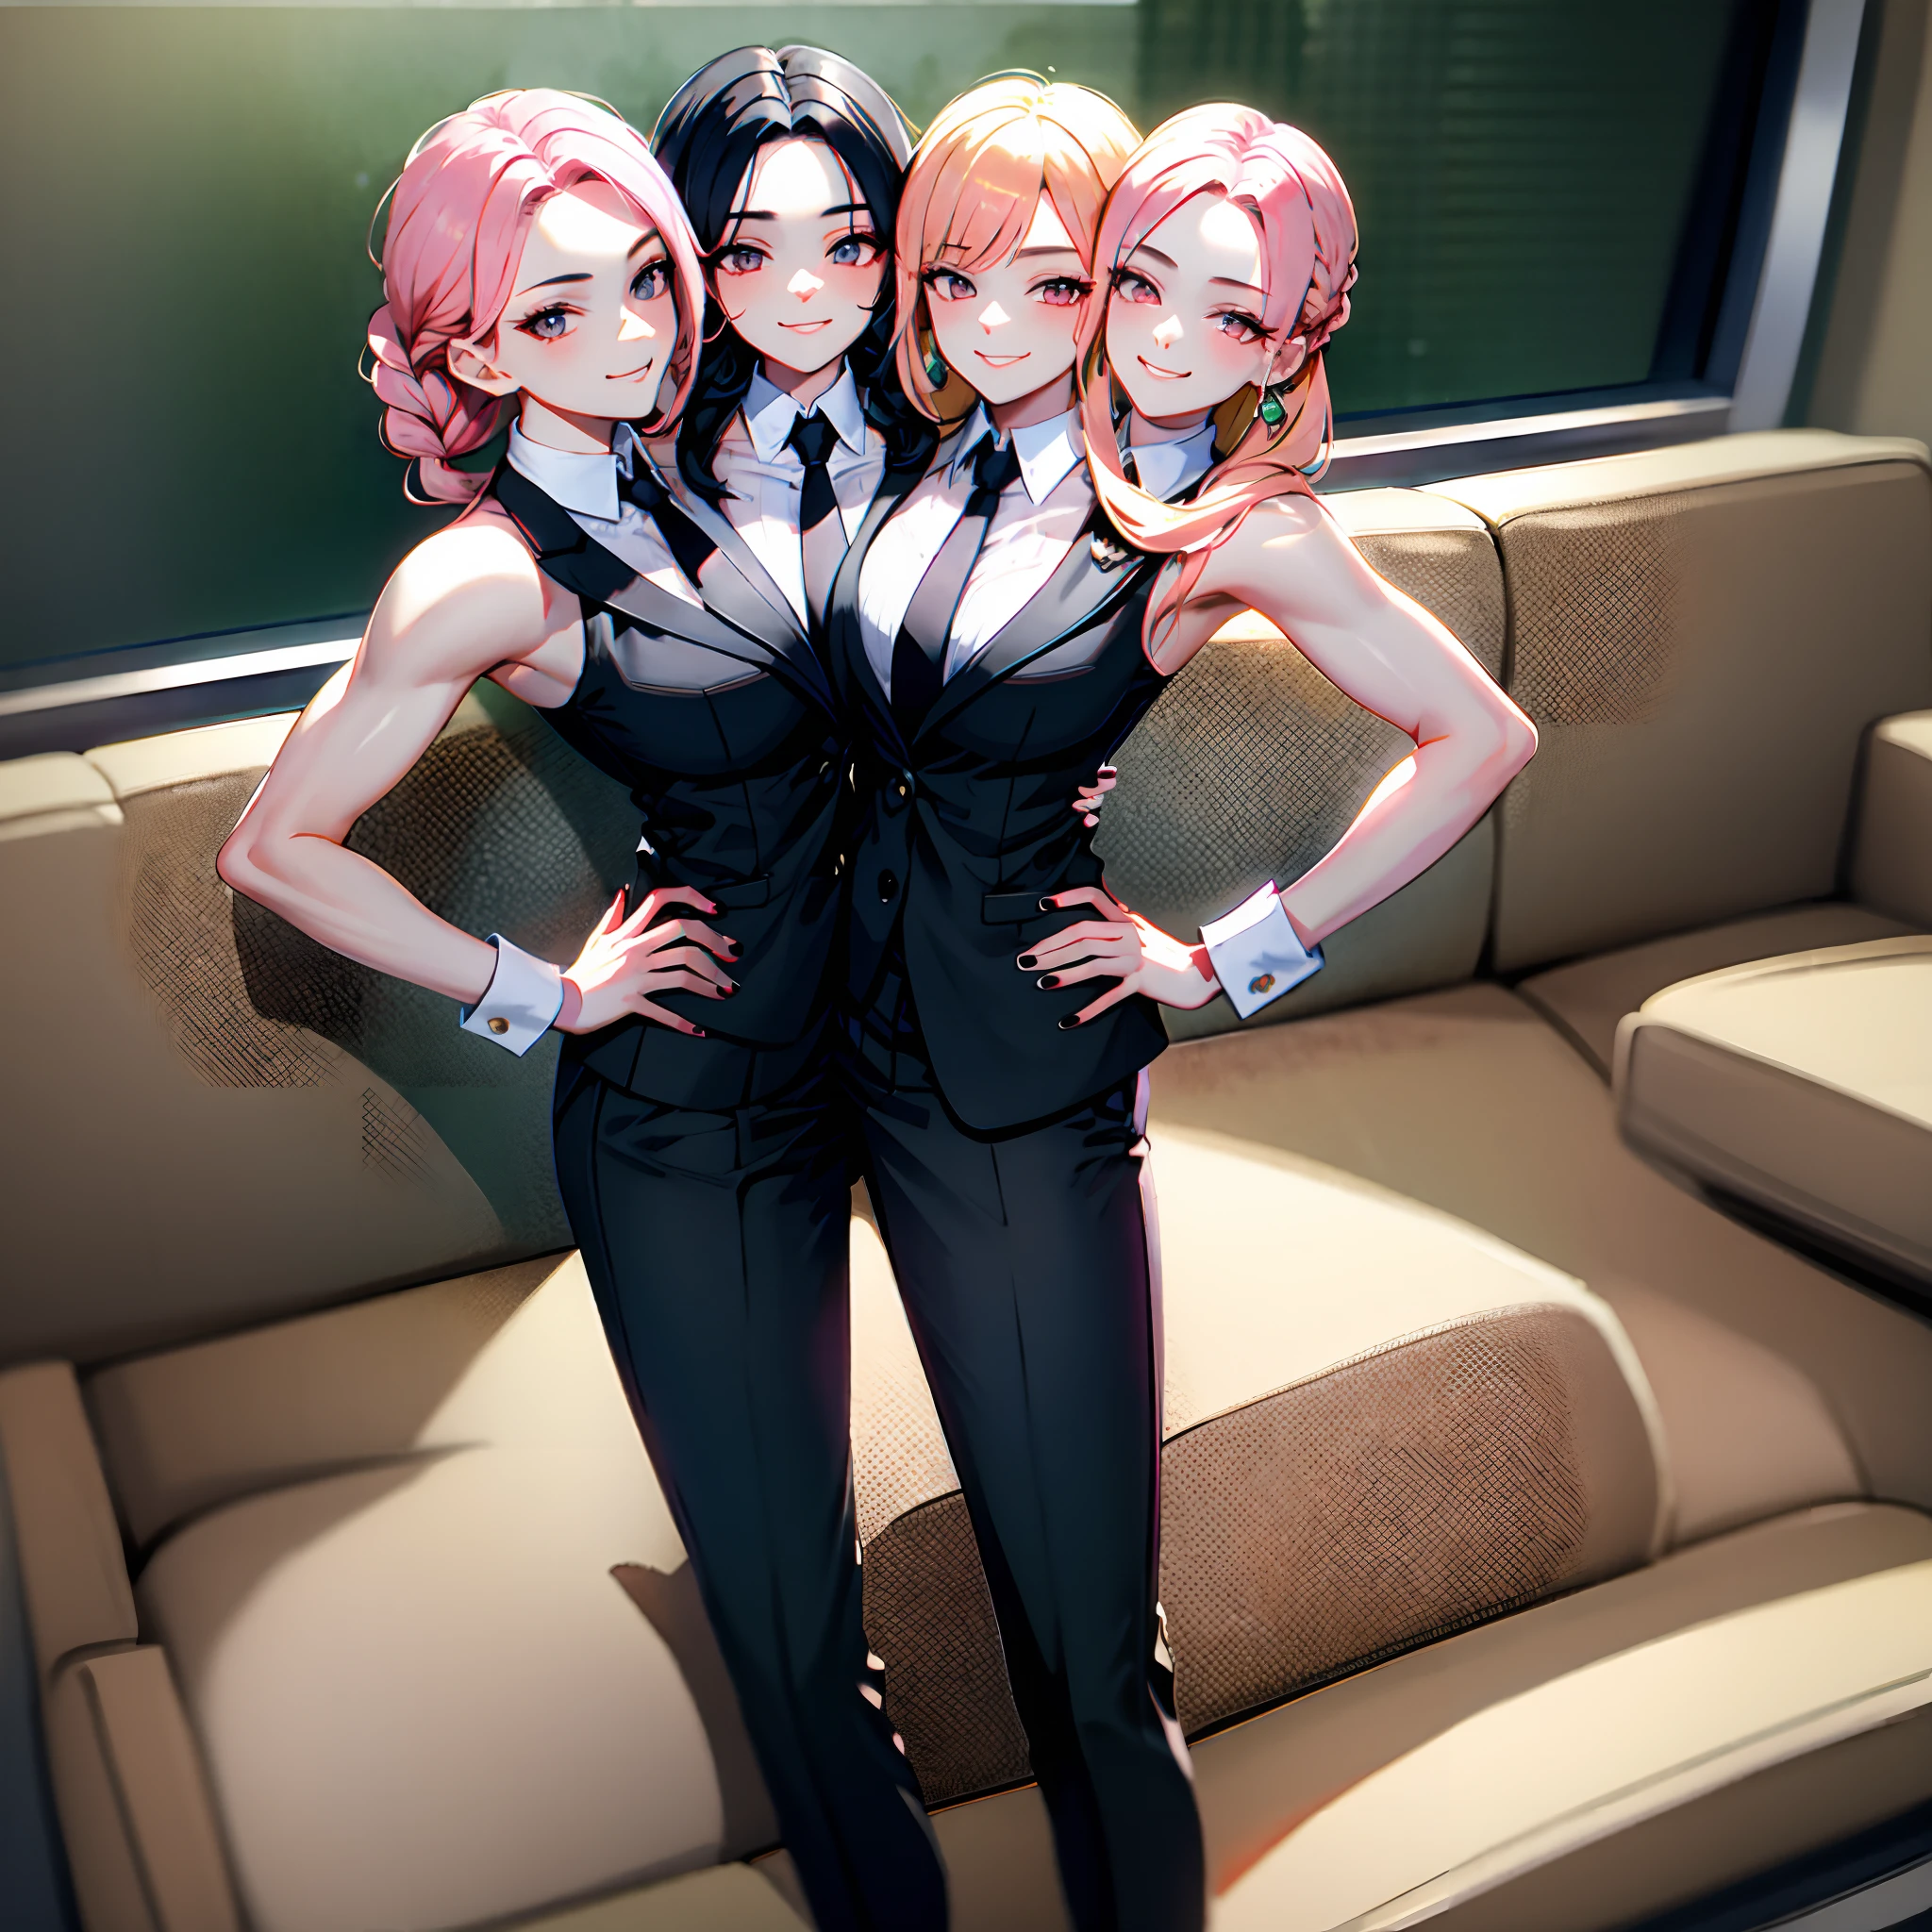 (masterpiece, best quality), best resolution, (3heads:1.5), dynamic angle, (masterpiece, best quality), best resolution, (3heads:1.5), dynamic angle, pink hair, black hair, blonde hair, black nails, smug, hand on hips, wink, braided hair, business suit, pants, tie, sitting, legs crossed, masculine, manly, muscular